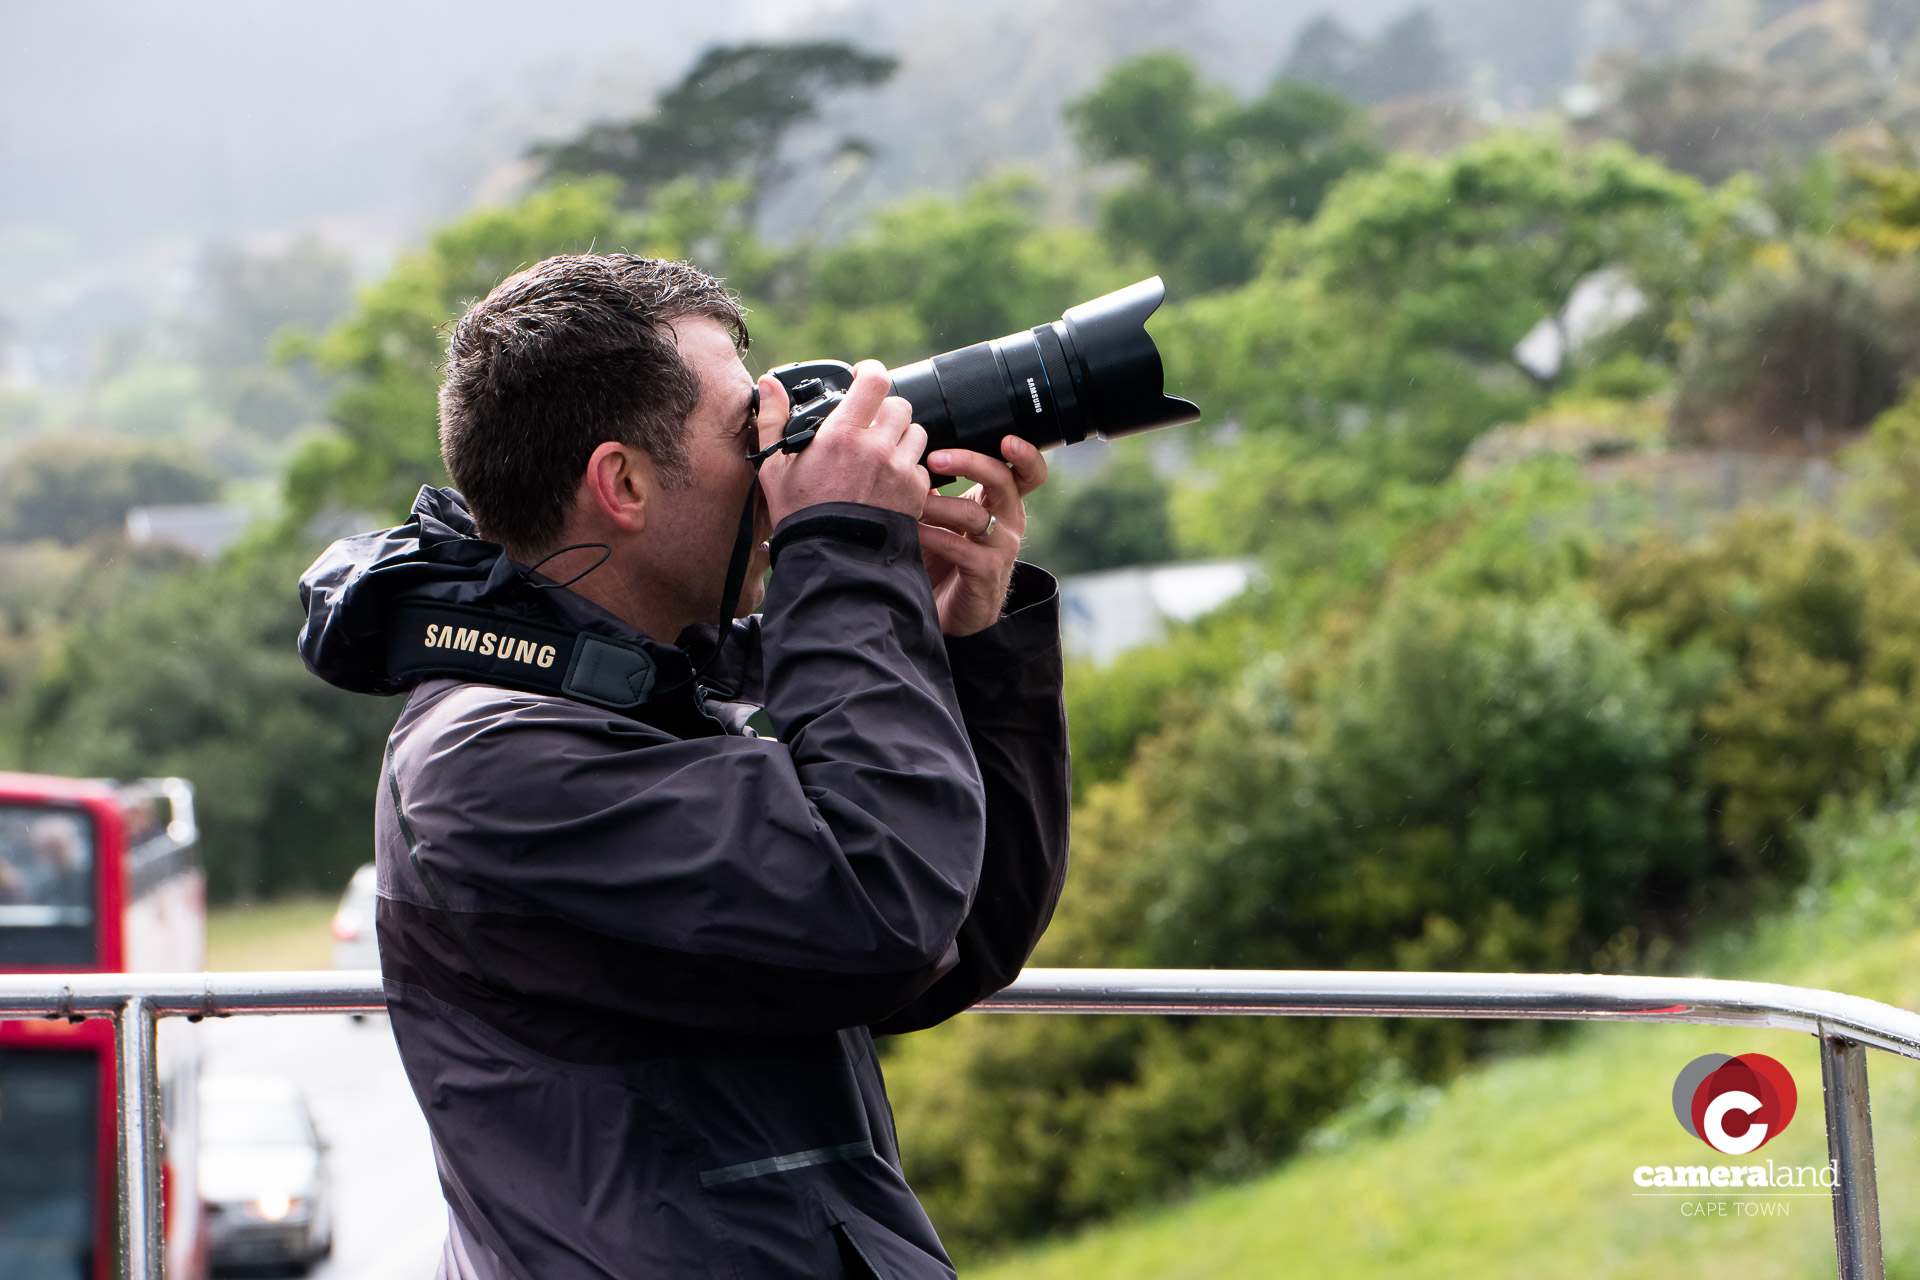 Getting the perfect shot | Cameraland Cape Town